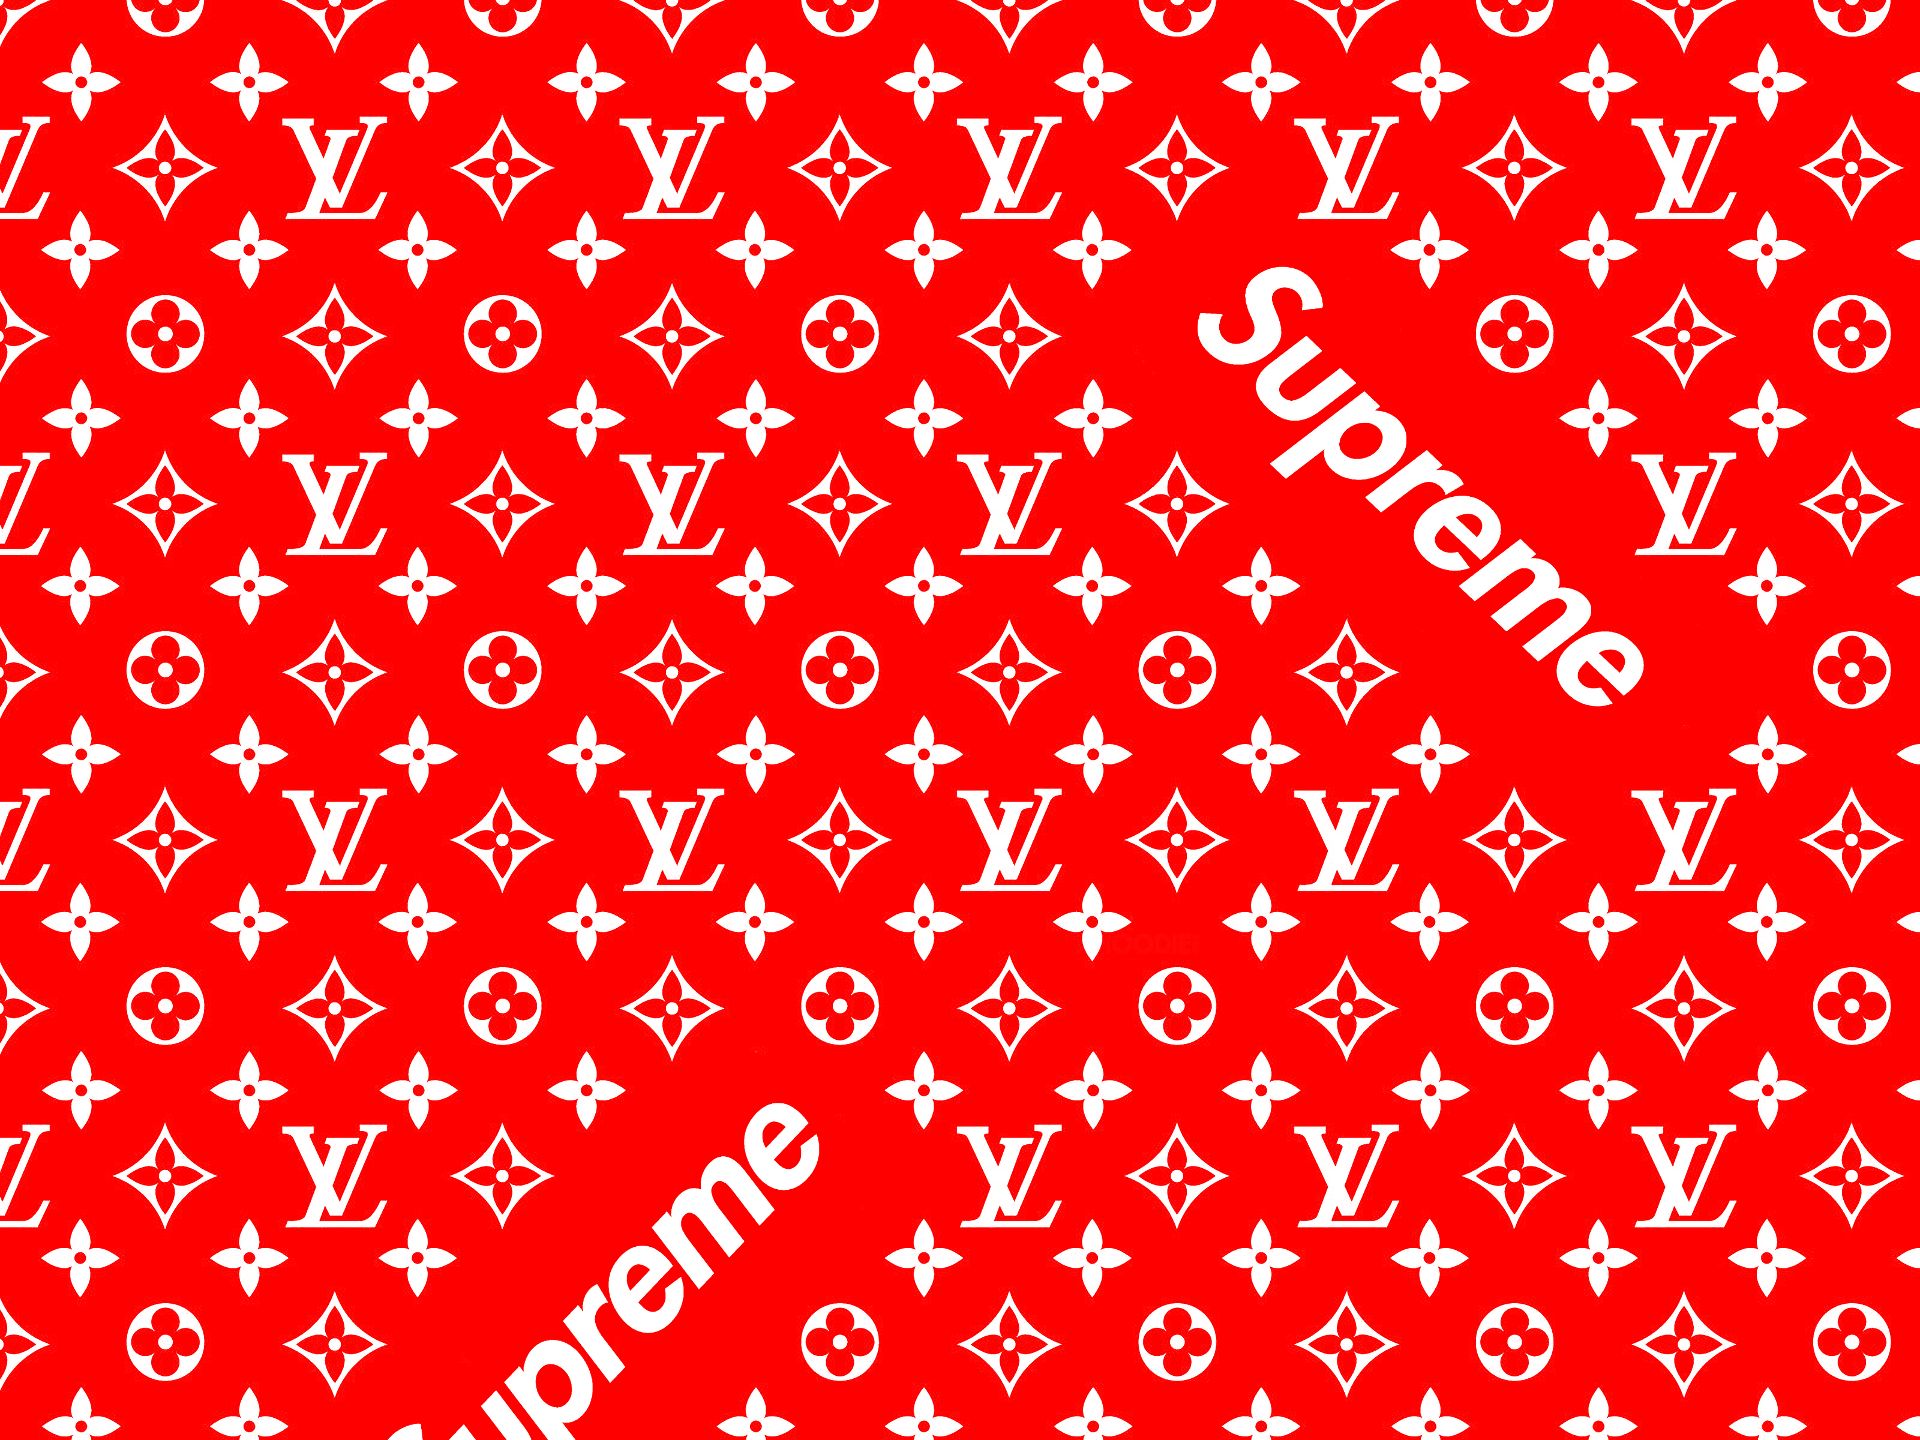 Panoramic Wallpapers Brands louis vuitton, supreme (brand), products